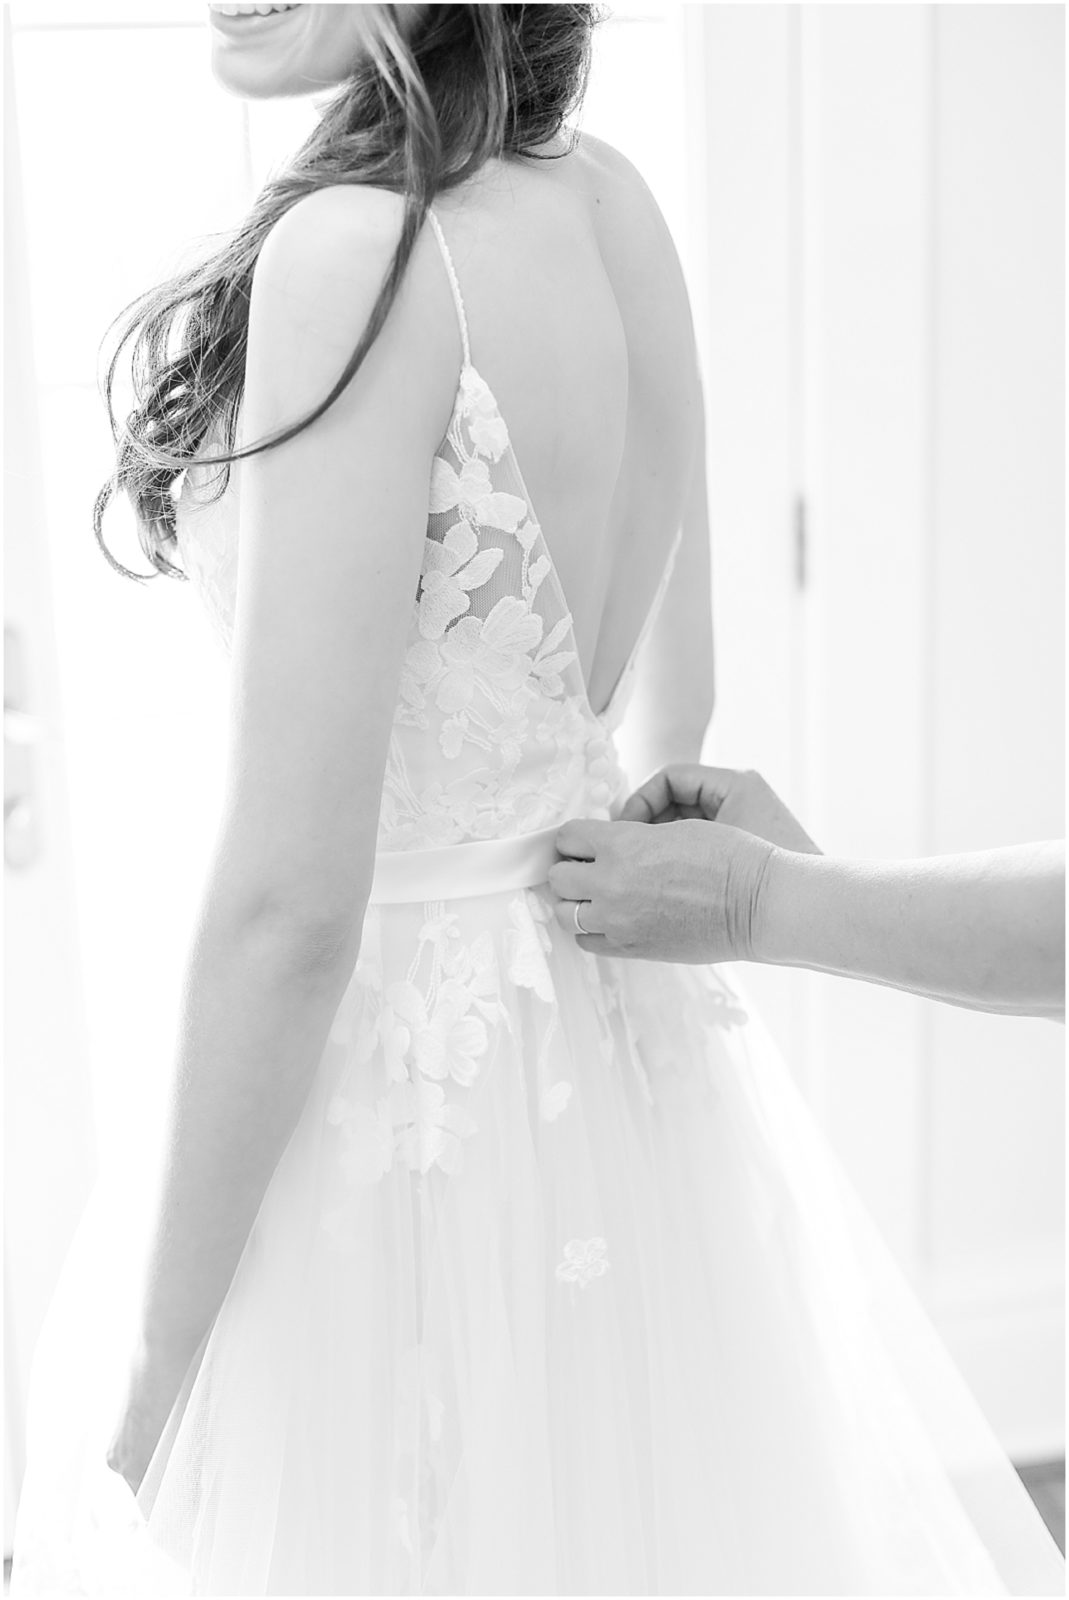 wedding details - getting ready and dressed 